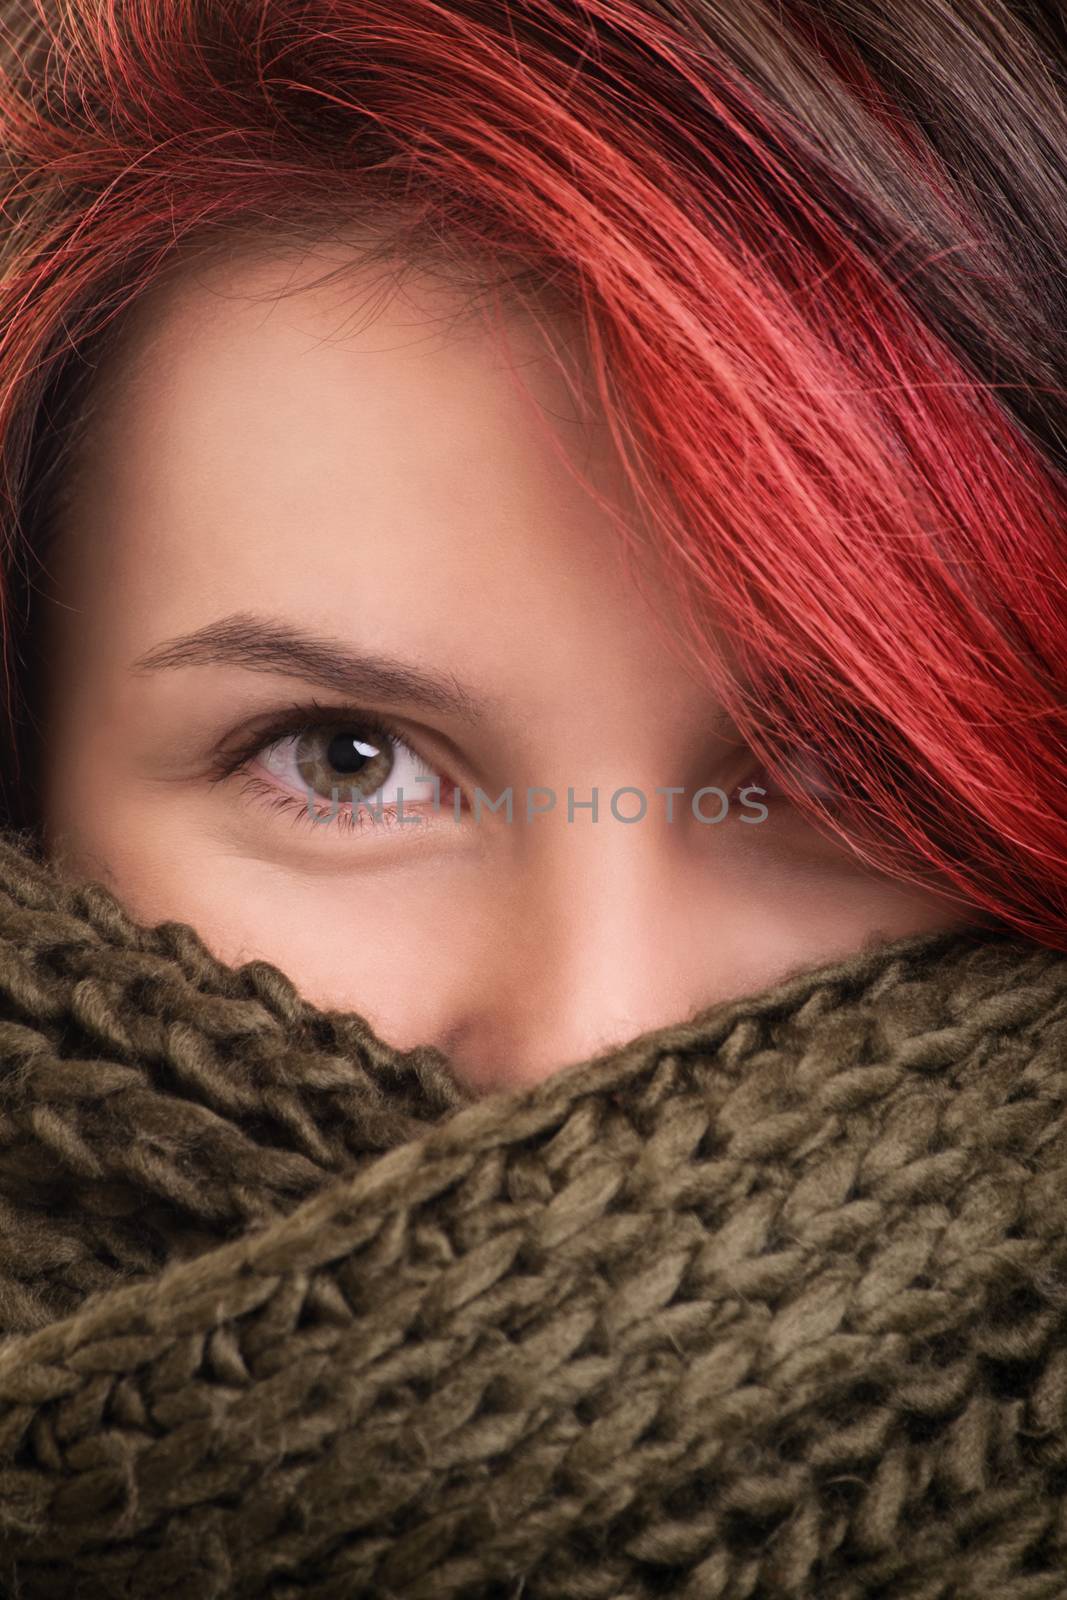 Portrait of a young girl wearing scarf by Mendelex